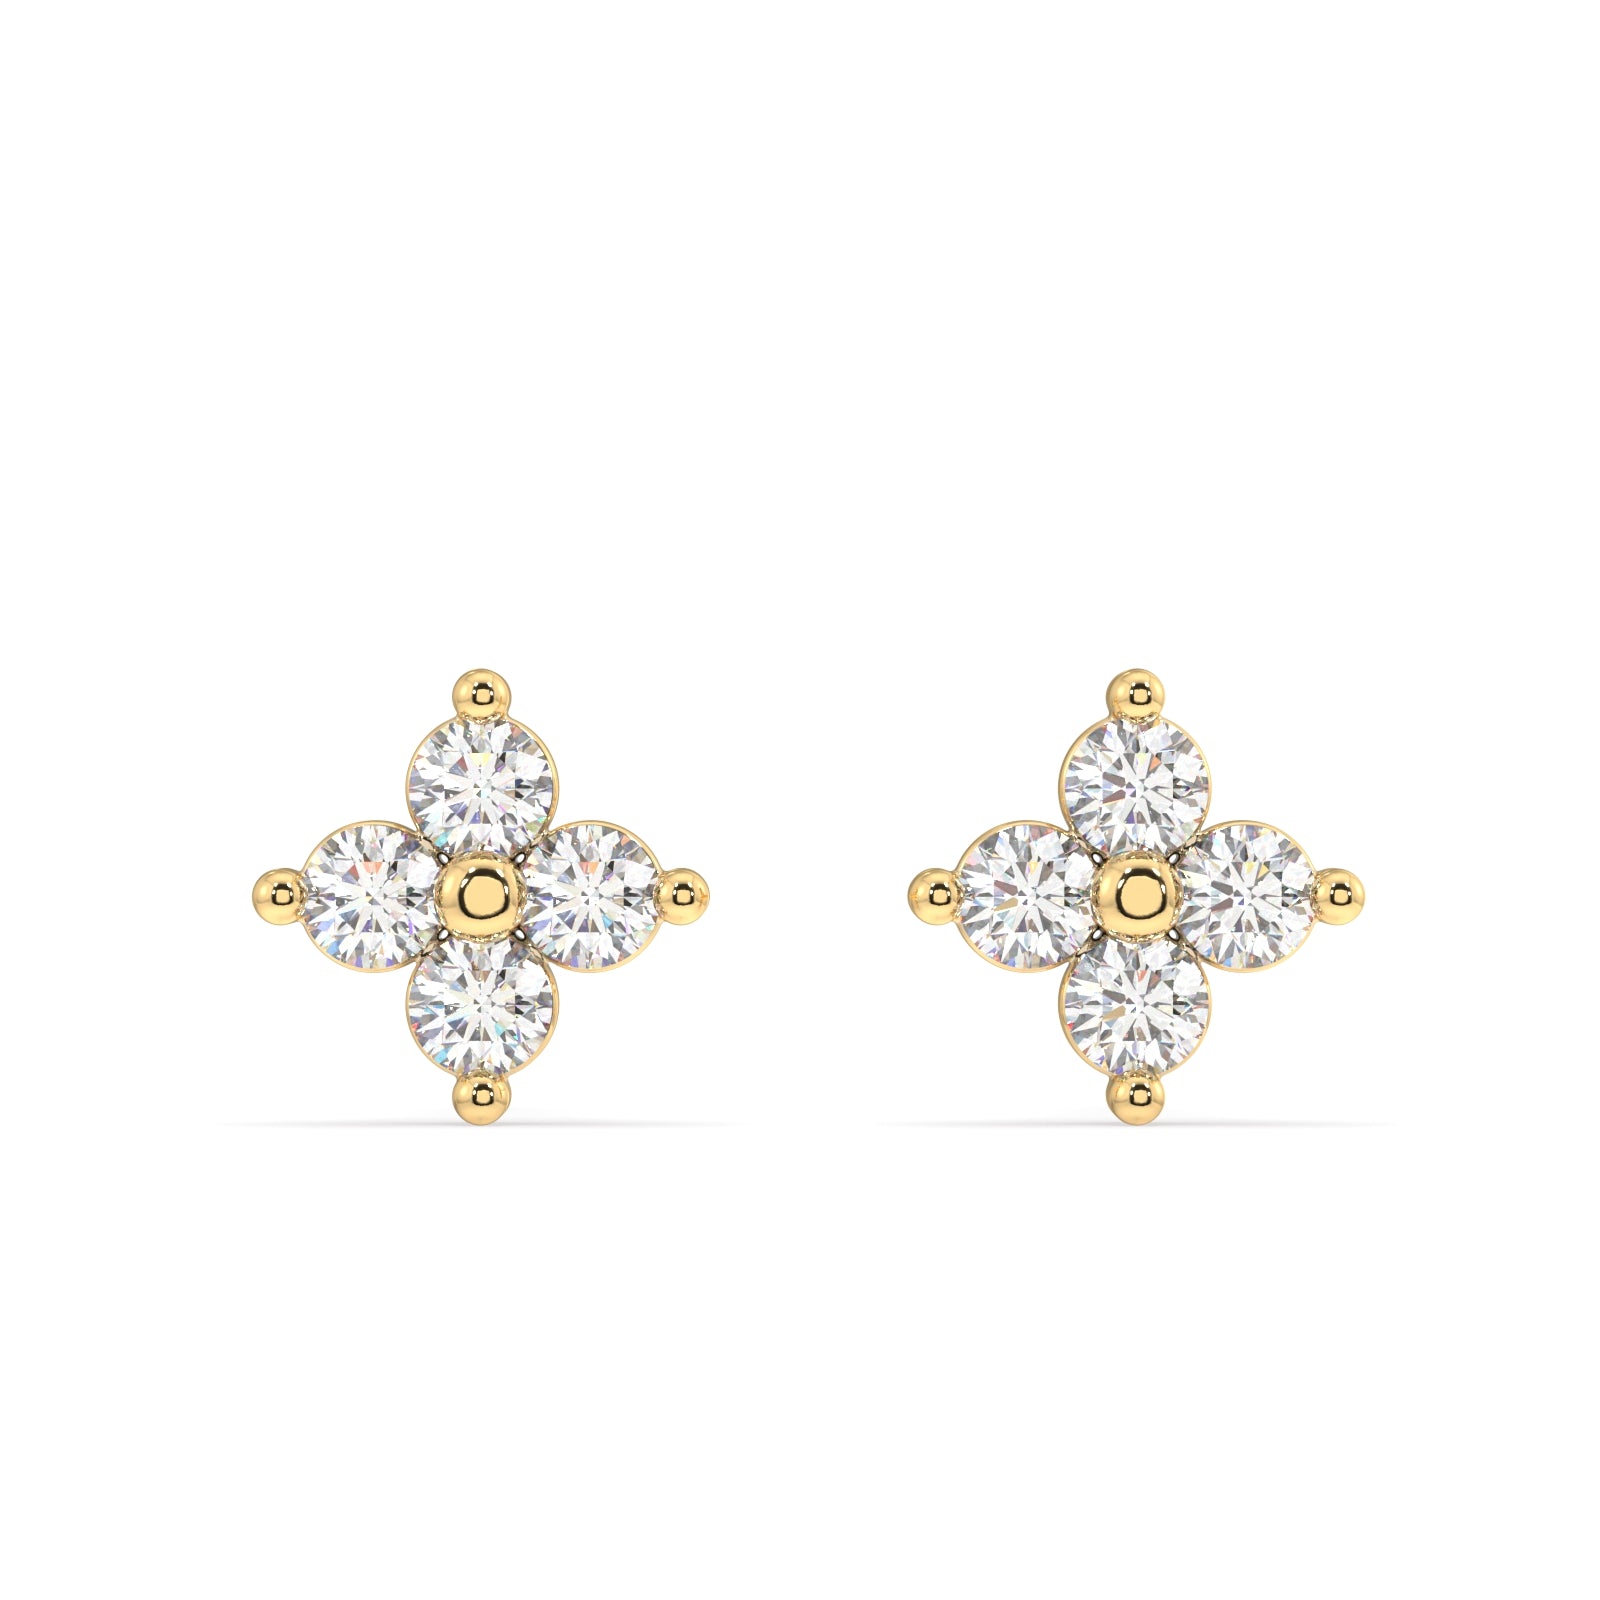 "Lotus Stud Earring: Elegant Front Angle View in Sterling Silver"